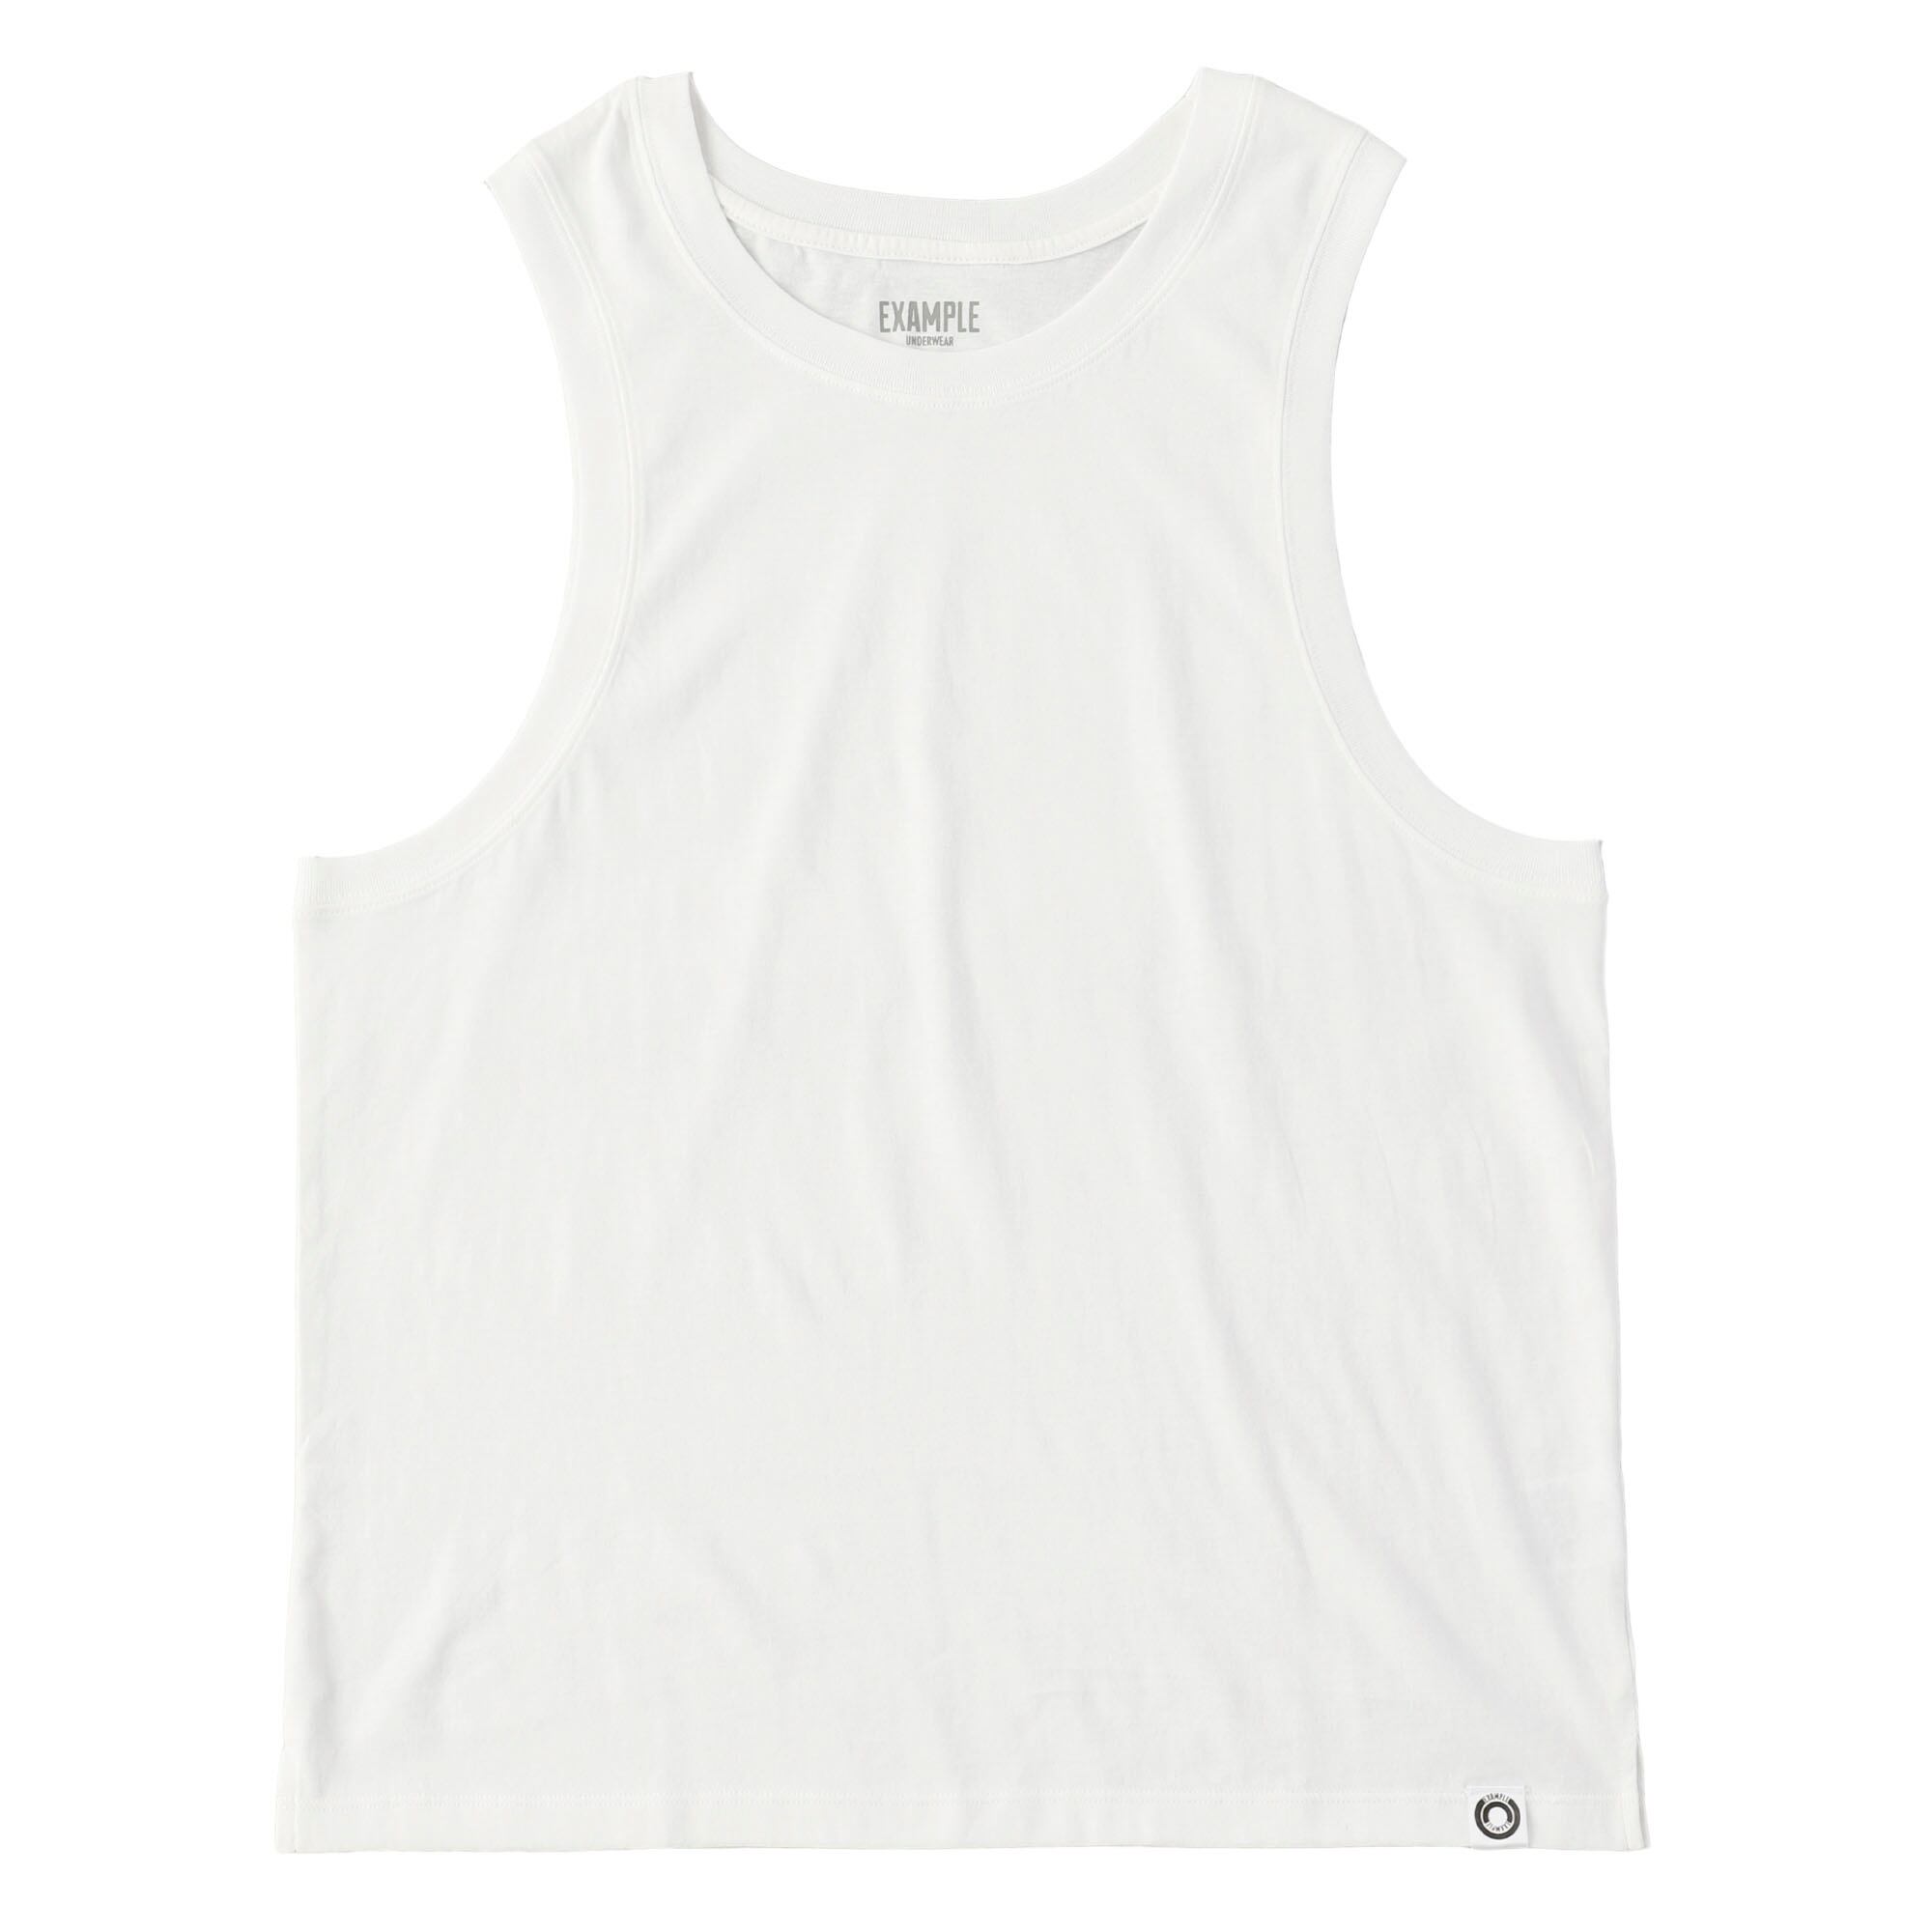 EXAMPLE UNDERWEAR 2PACK TANK TOP / WHITE